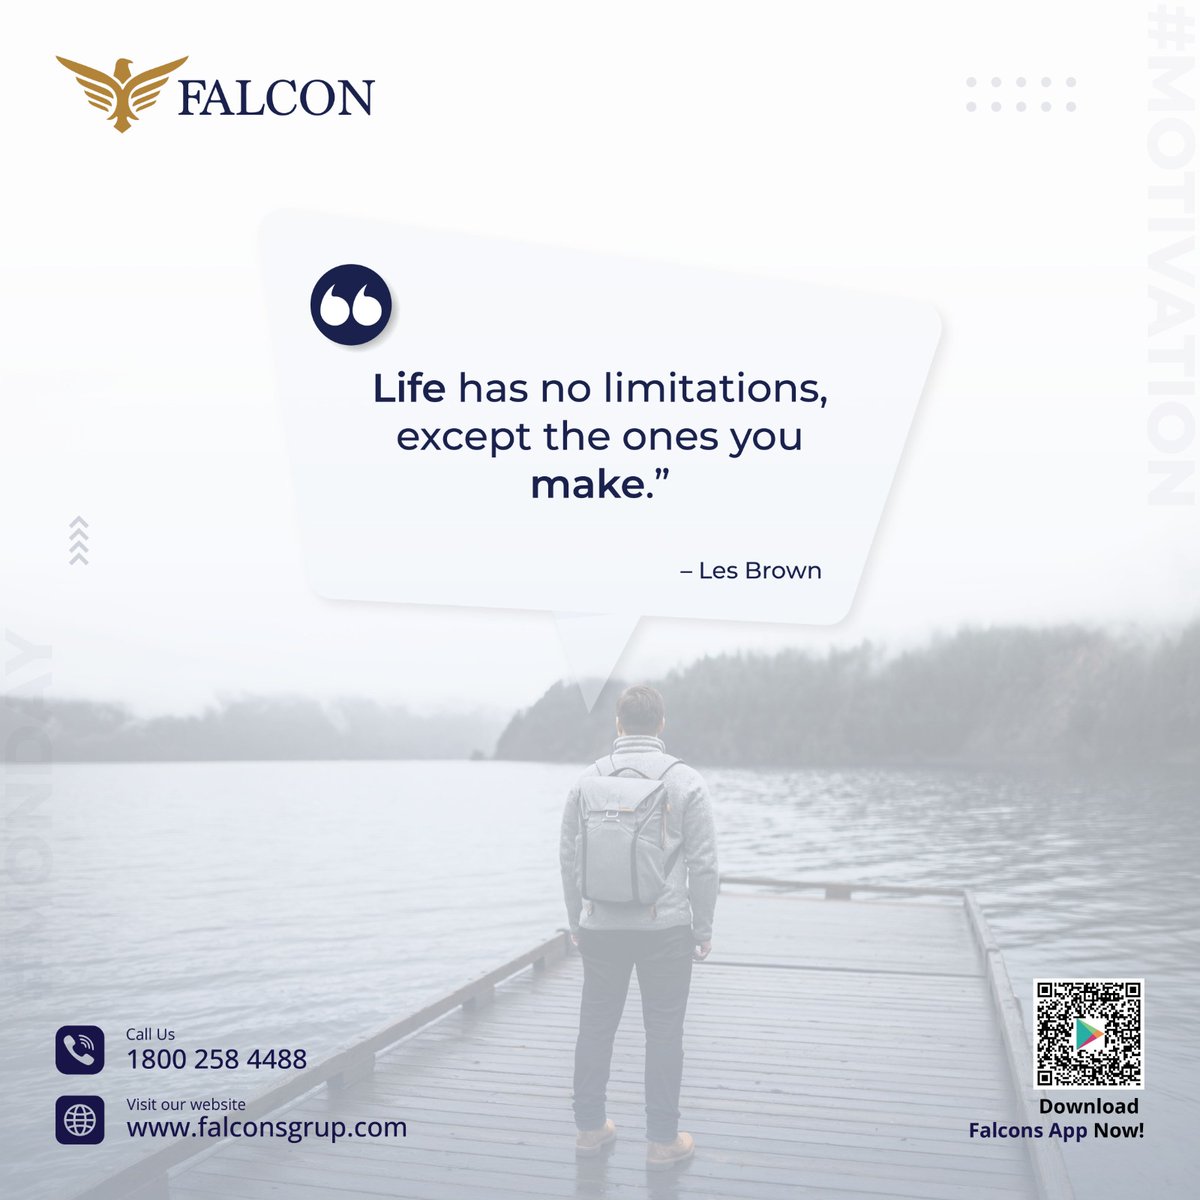 Happy Monday, everyone!

Here's your dose of MondayMotivation: 'Life has no limitations, except the ones you make.' 

Visit: falconsgrup.com
Contact us: 18002584488

#falcon #falconinvoicediscounting #mondaymotivations #mondaymotivation #motivation